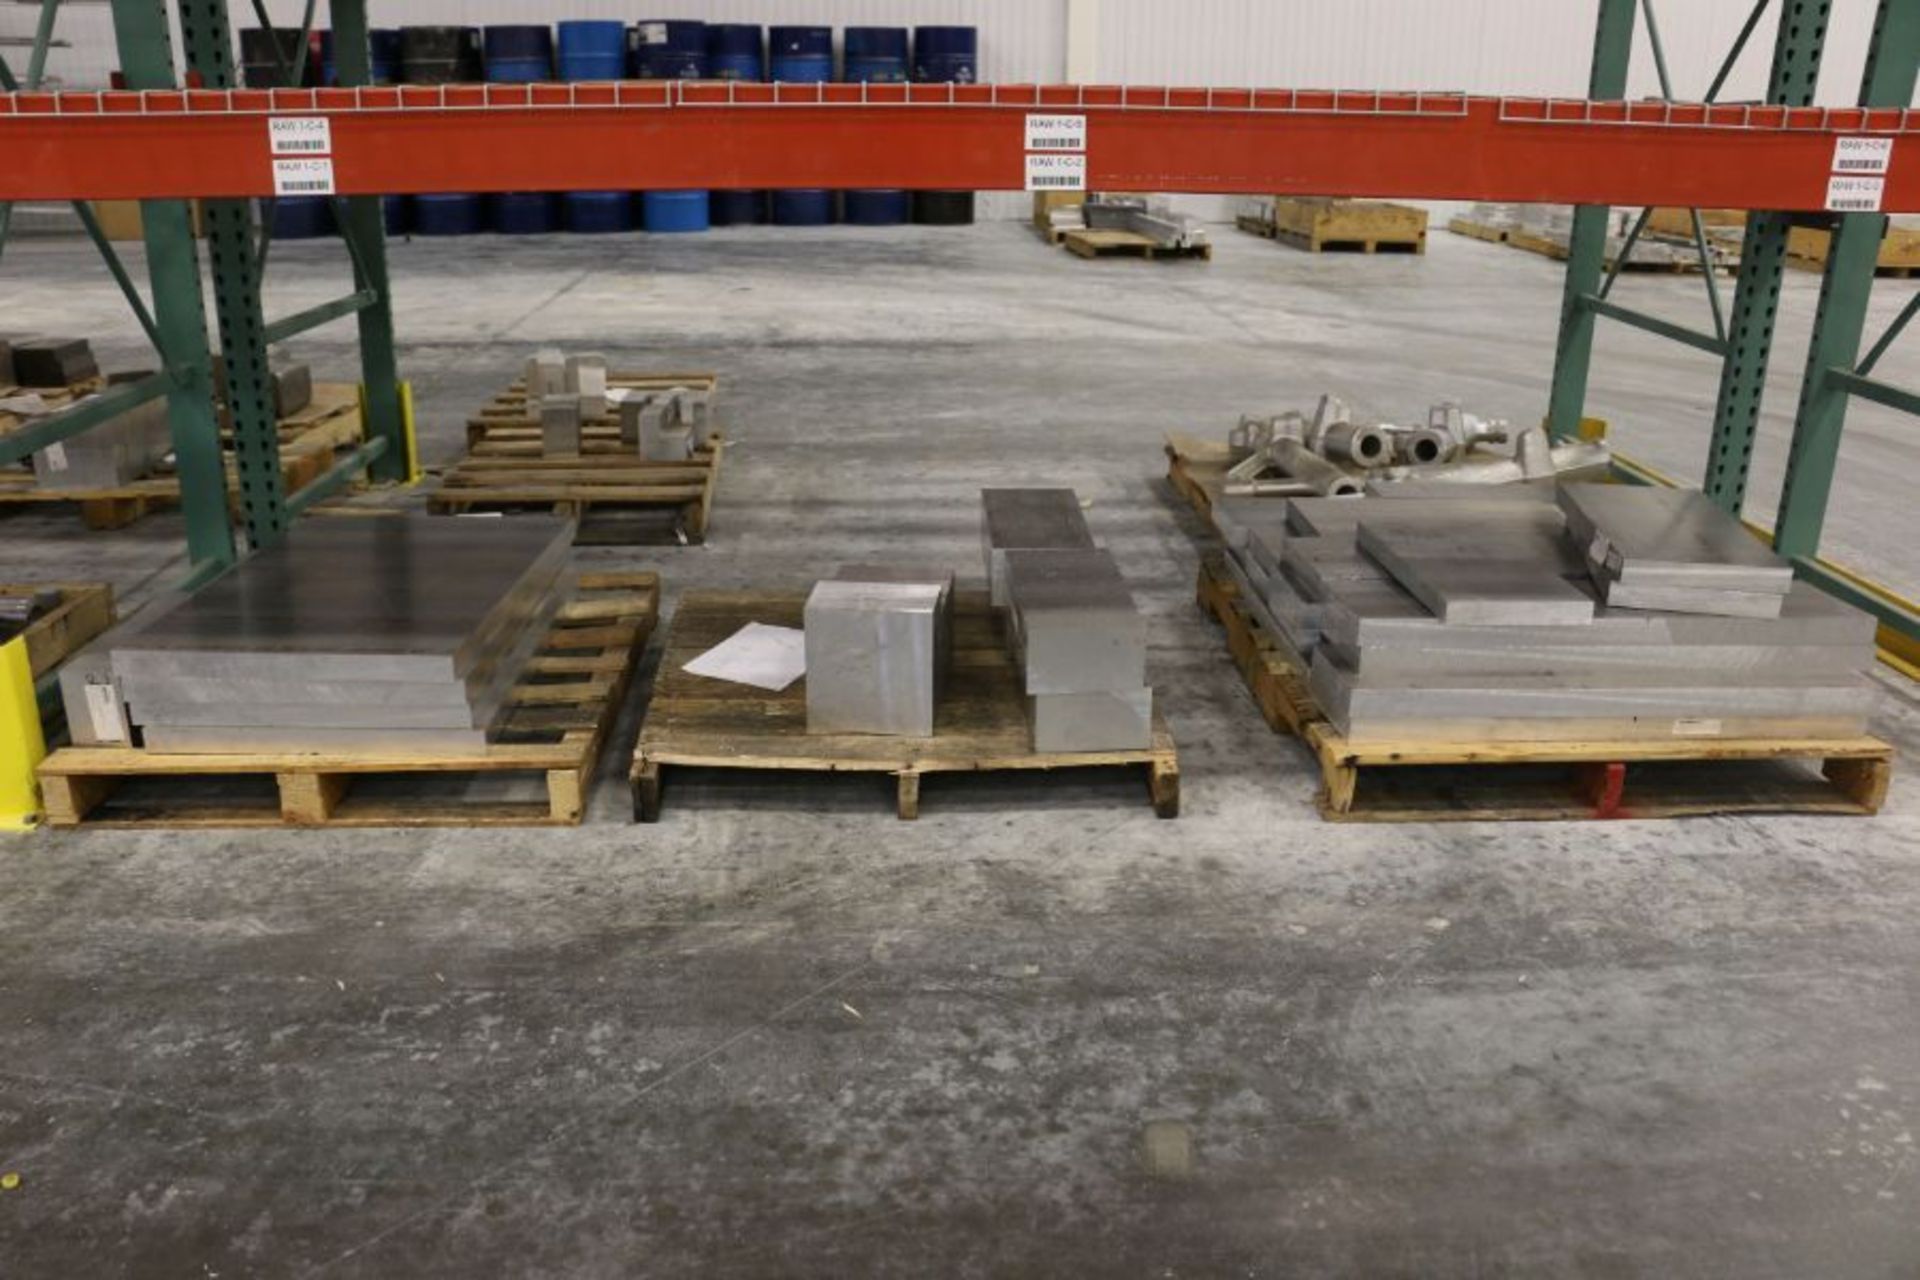 (3) Pallets of Raw Material